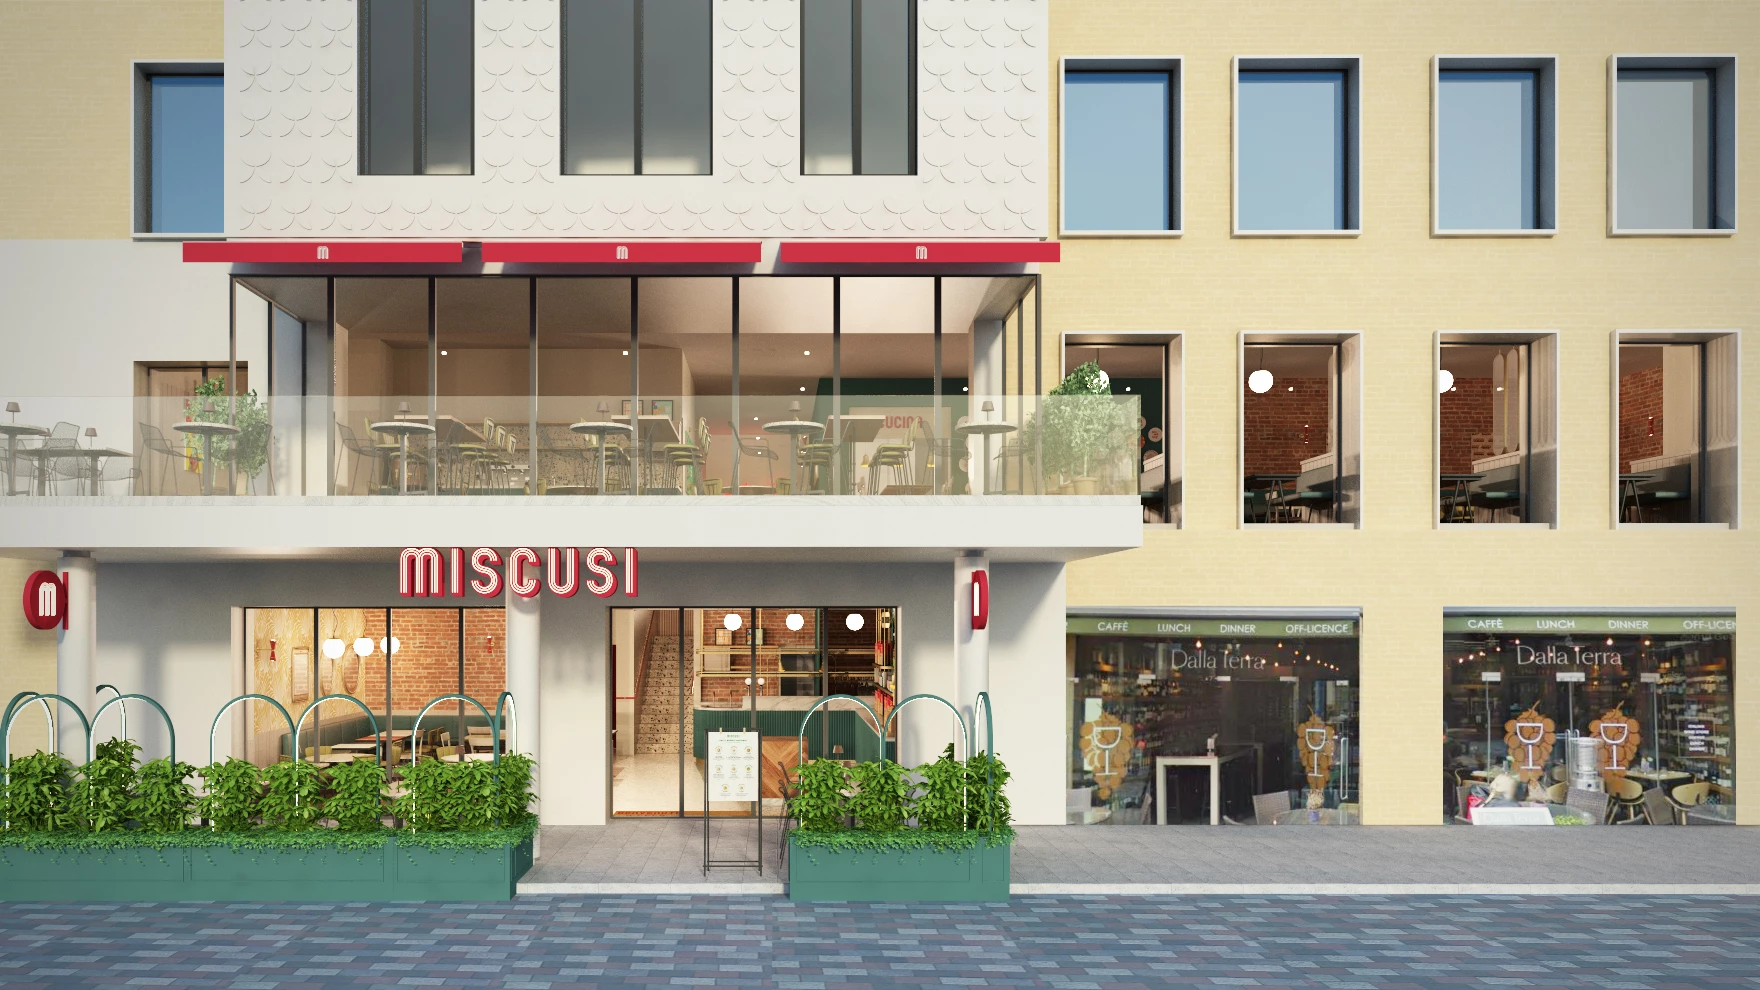 miscusi signs for UK restaurant debut in The Yards, Covent Garden